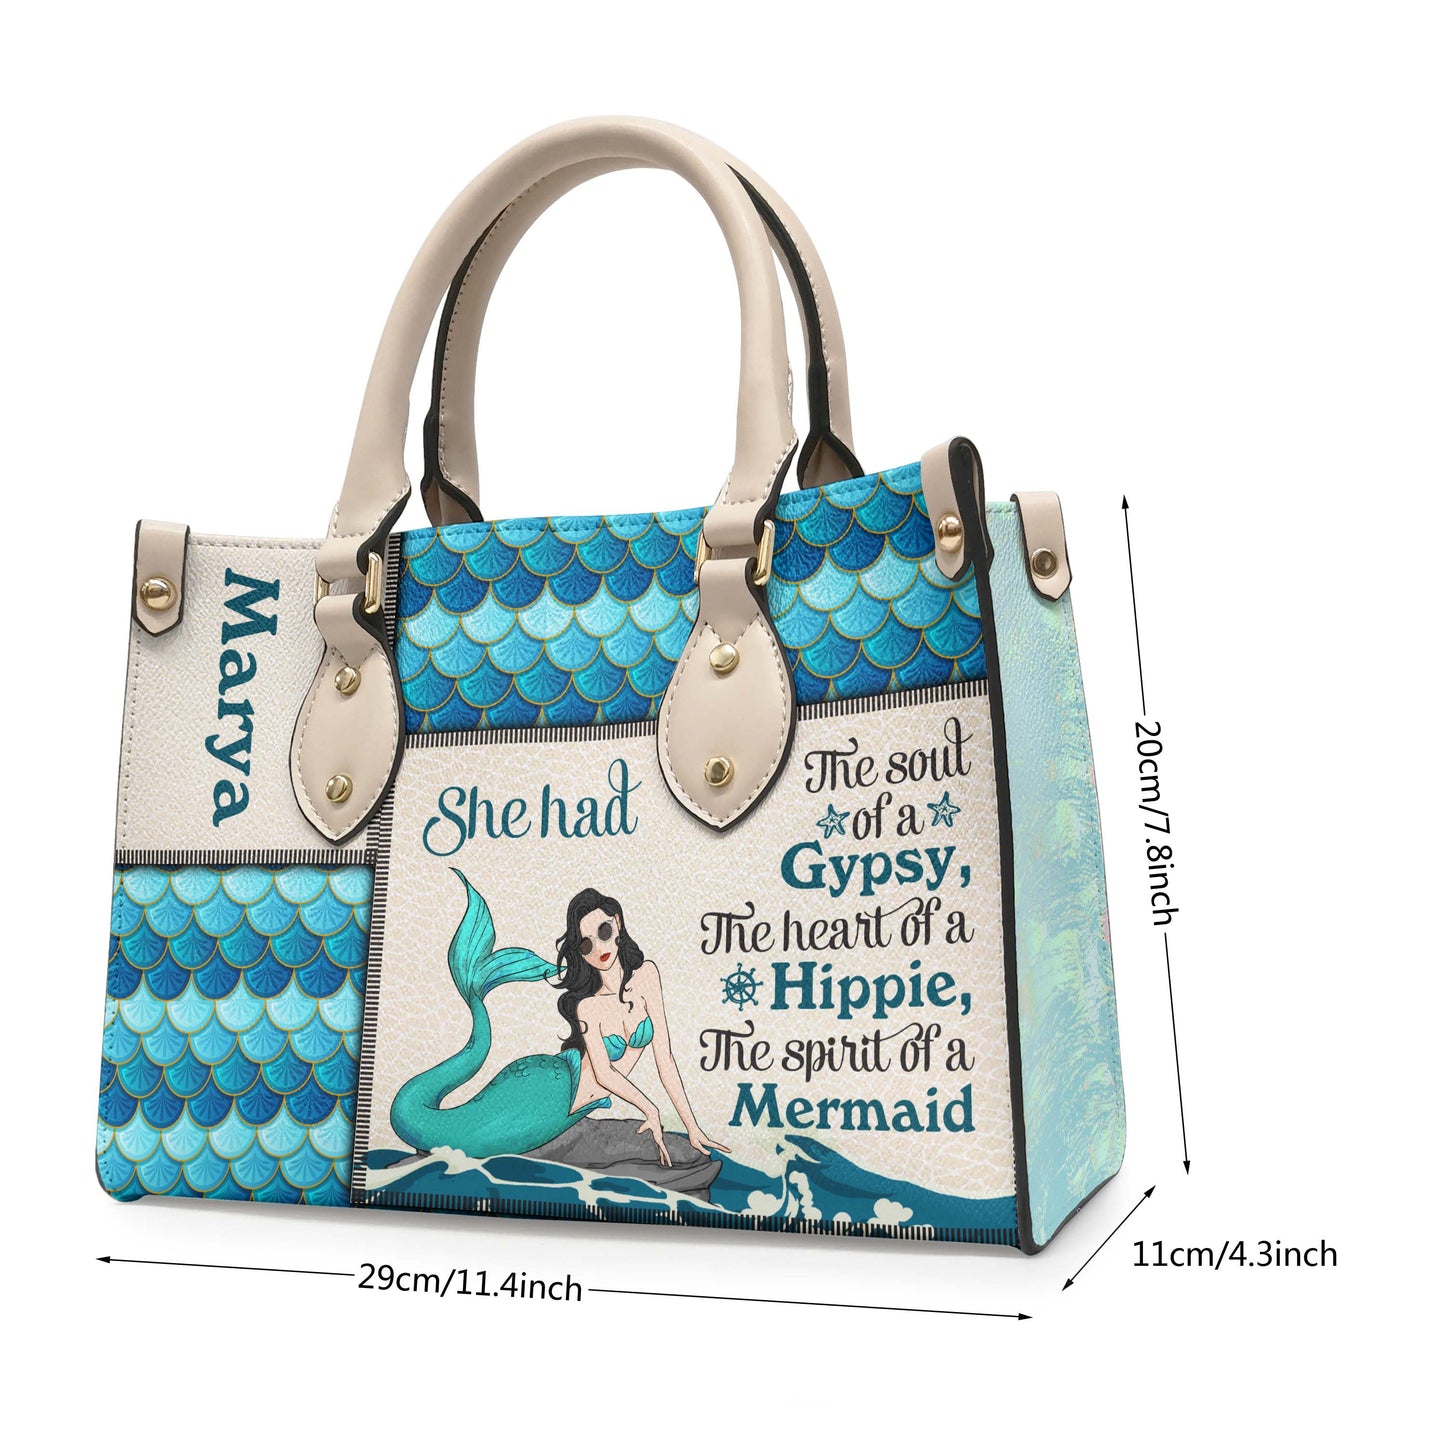 She Had The Spirit Of A Mermaid - Personalized Leather Bag - Birthday, Loving Gift For Her, Ocean Lover, Mermaid Girl